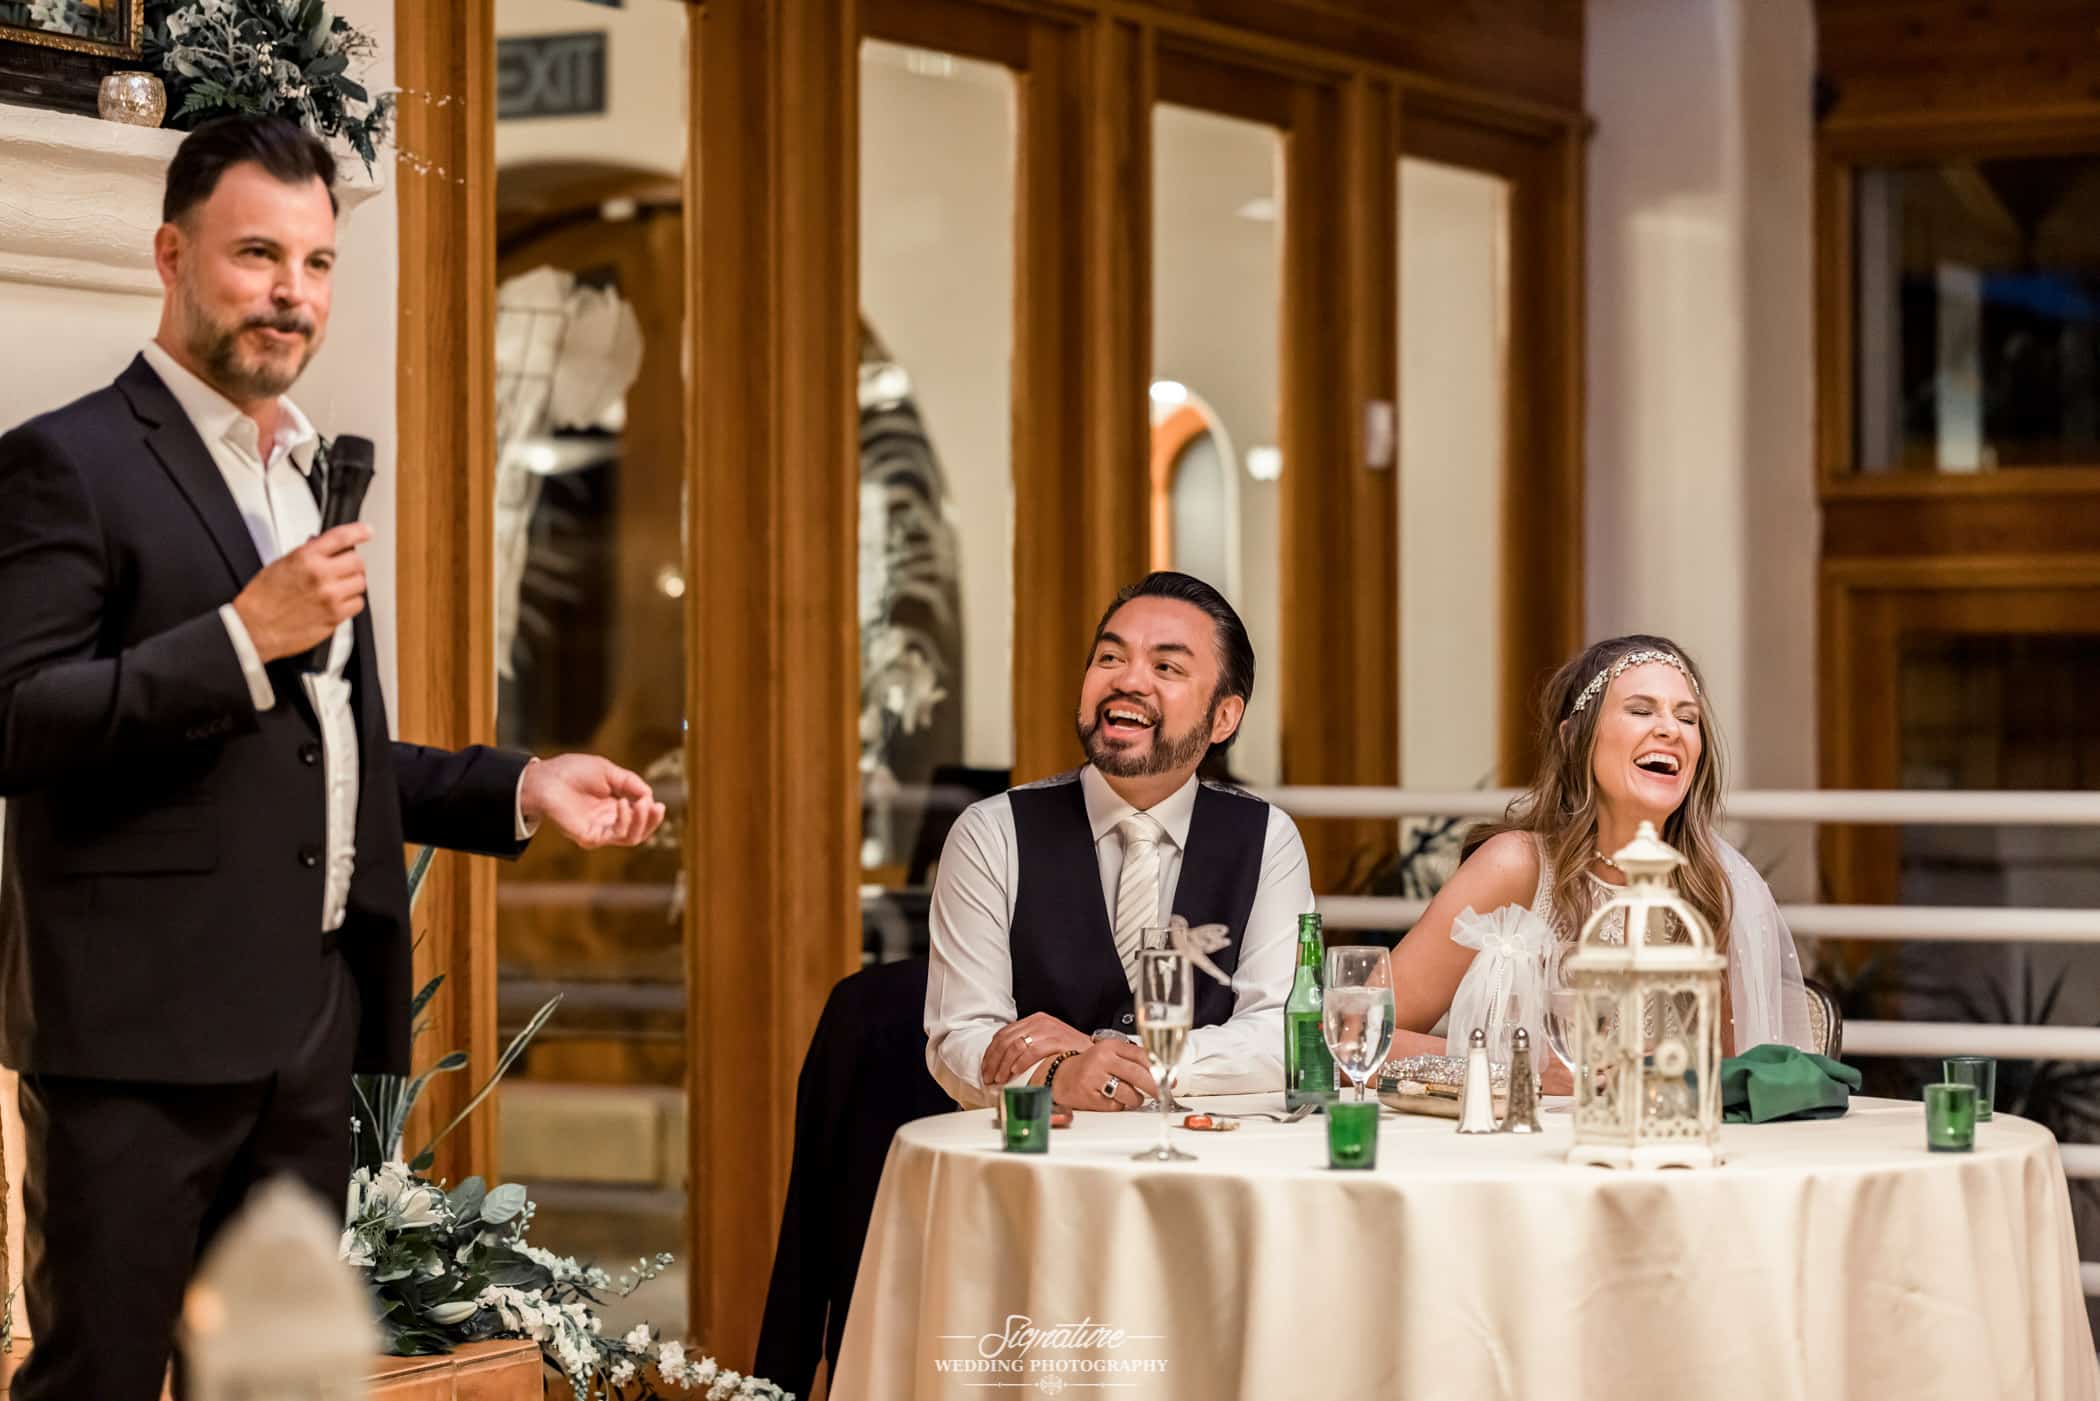 Bride and groom laugh while man gives speech at wedding reception